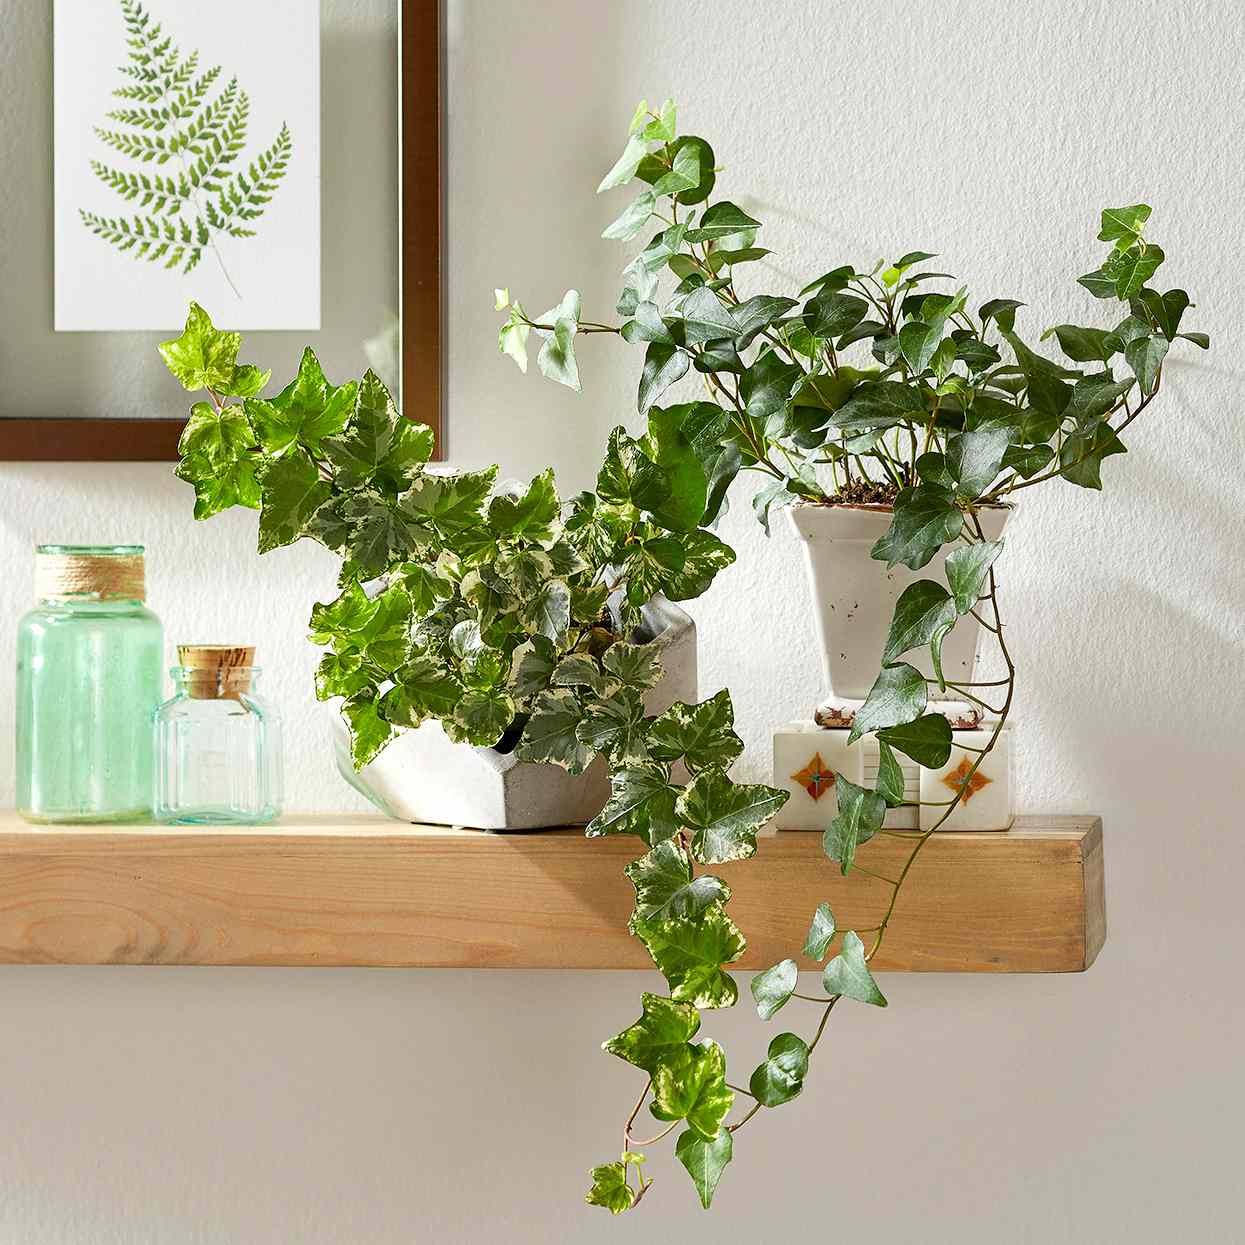 Indoor Plants For Low Light Better Homes Gardens,Kids Playroom Storage Diy Toy Storage Ideas For Small Spaces